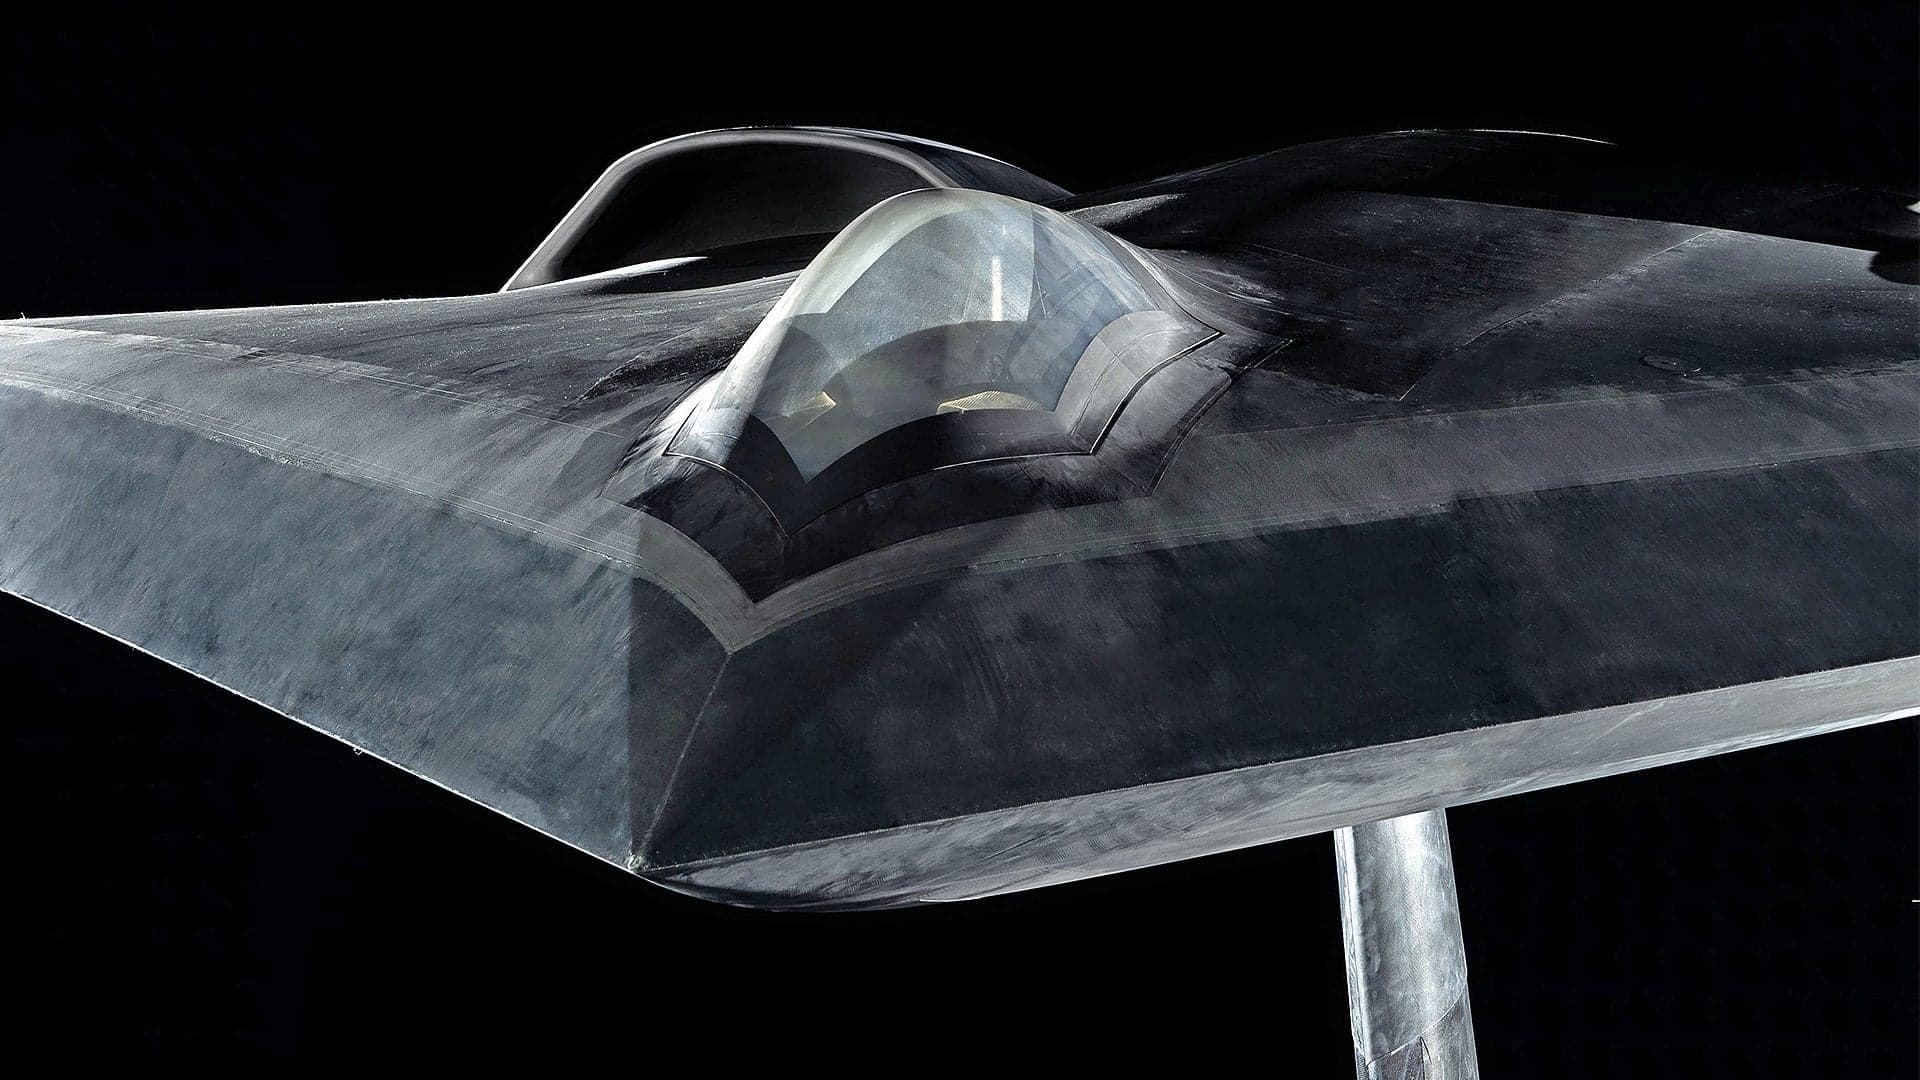 Airbus’s Secret Stealth Unmanned Combat Air Vehicle Research Program Breaks Cover (Updated)